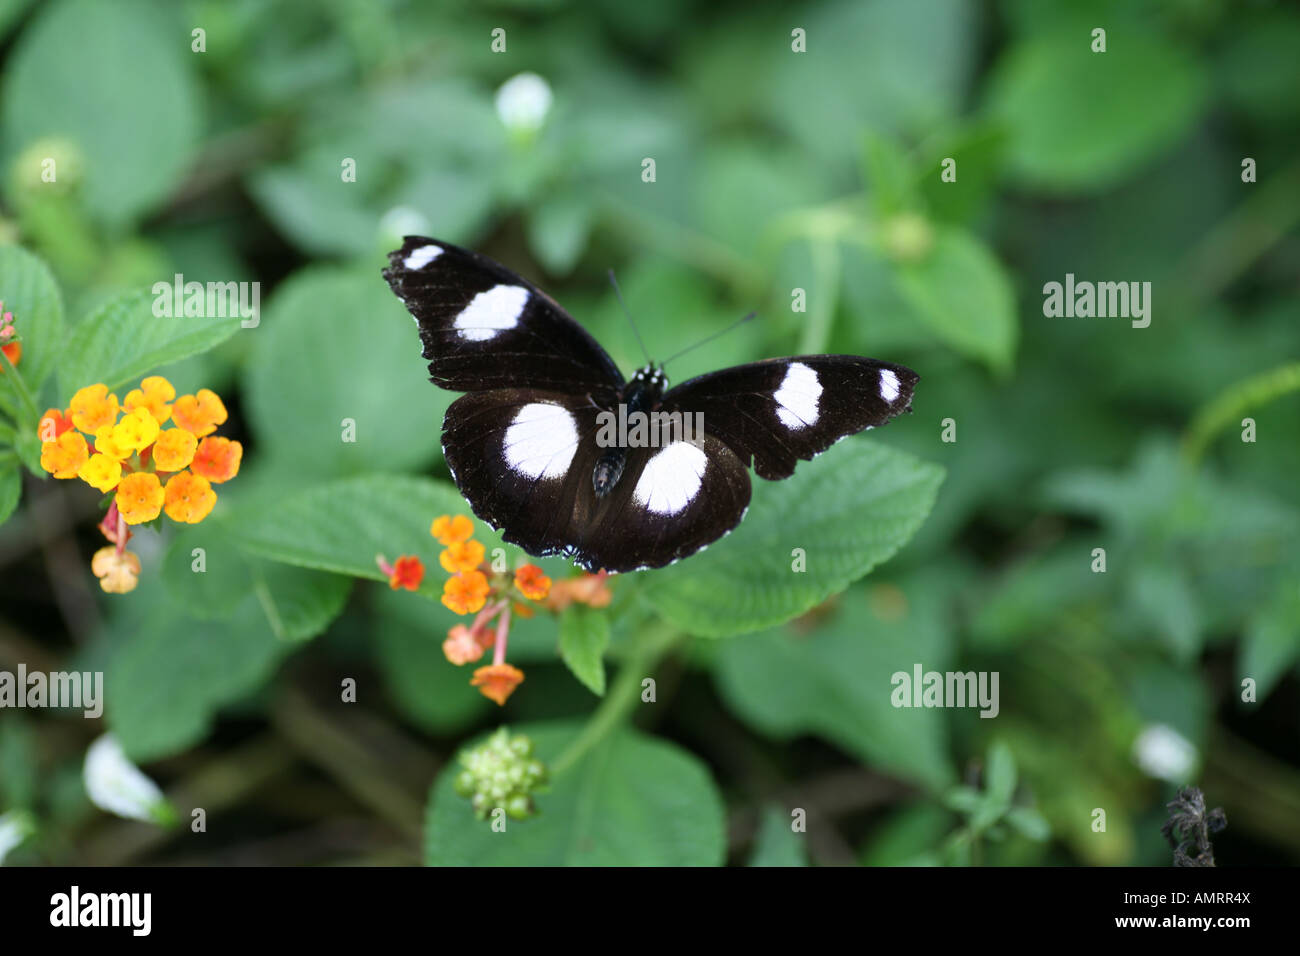 Diadem Butterfly on leaf Stock Photo